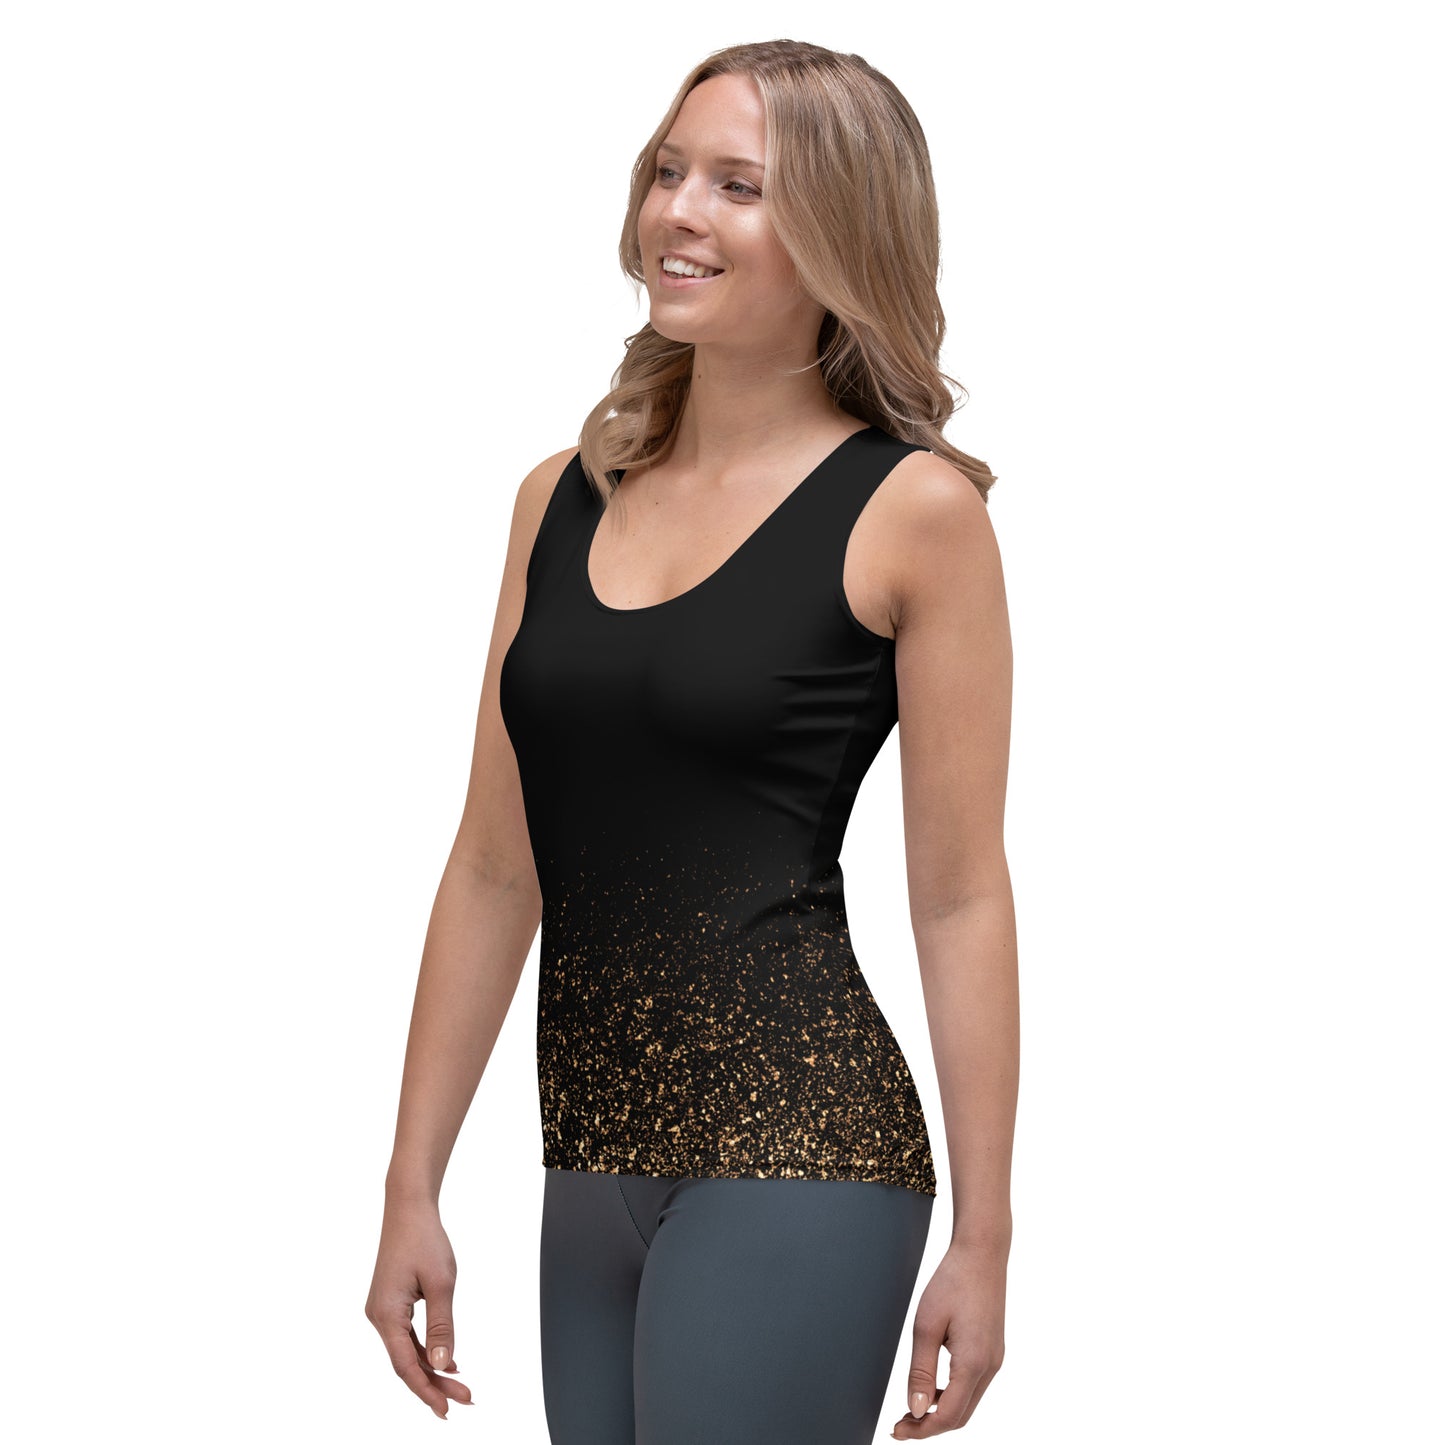 Grinnell Street Gold Tank Top